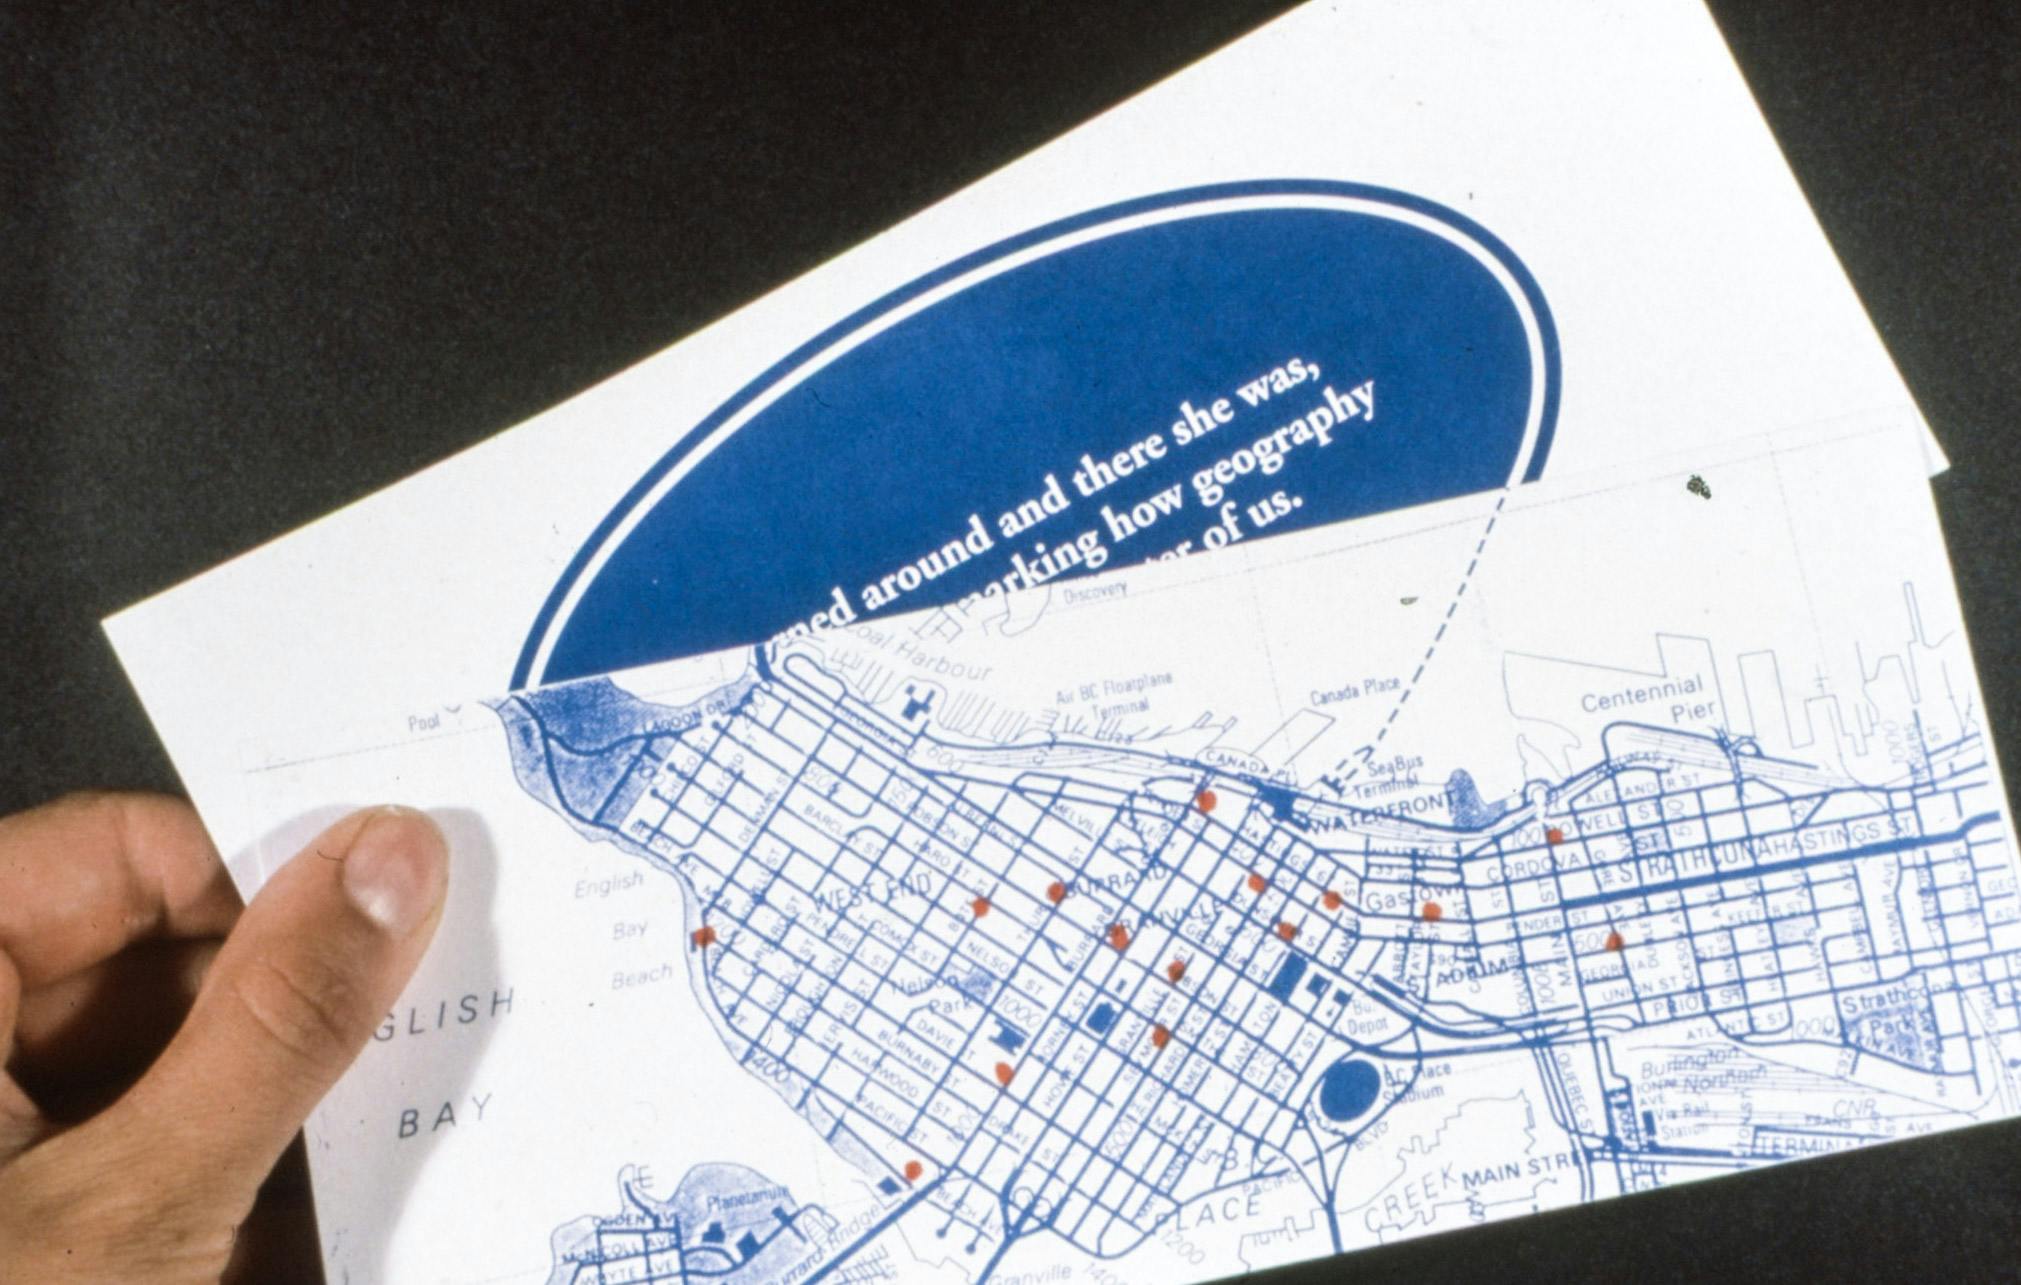 A closeup of a hand holding two horizontal papers. The one in front shows a map of downtown Vancouver and its neighbourhoods. The one in the back shows a blue oval with partially visible white text.